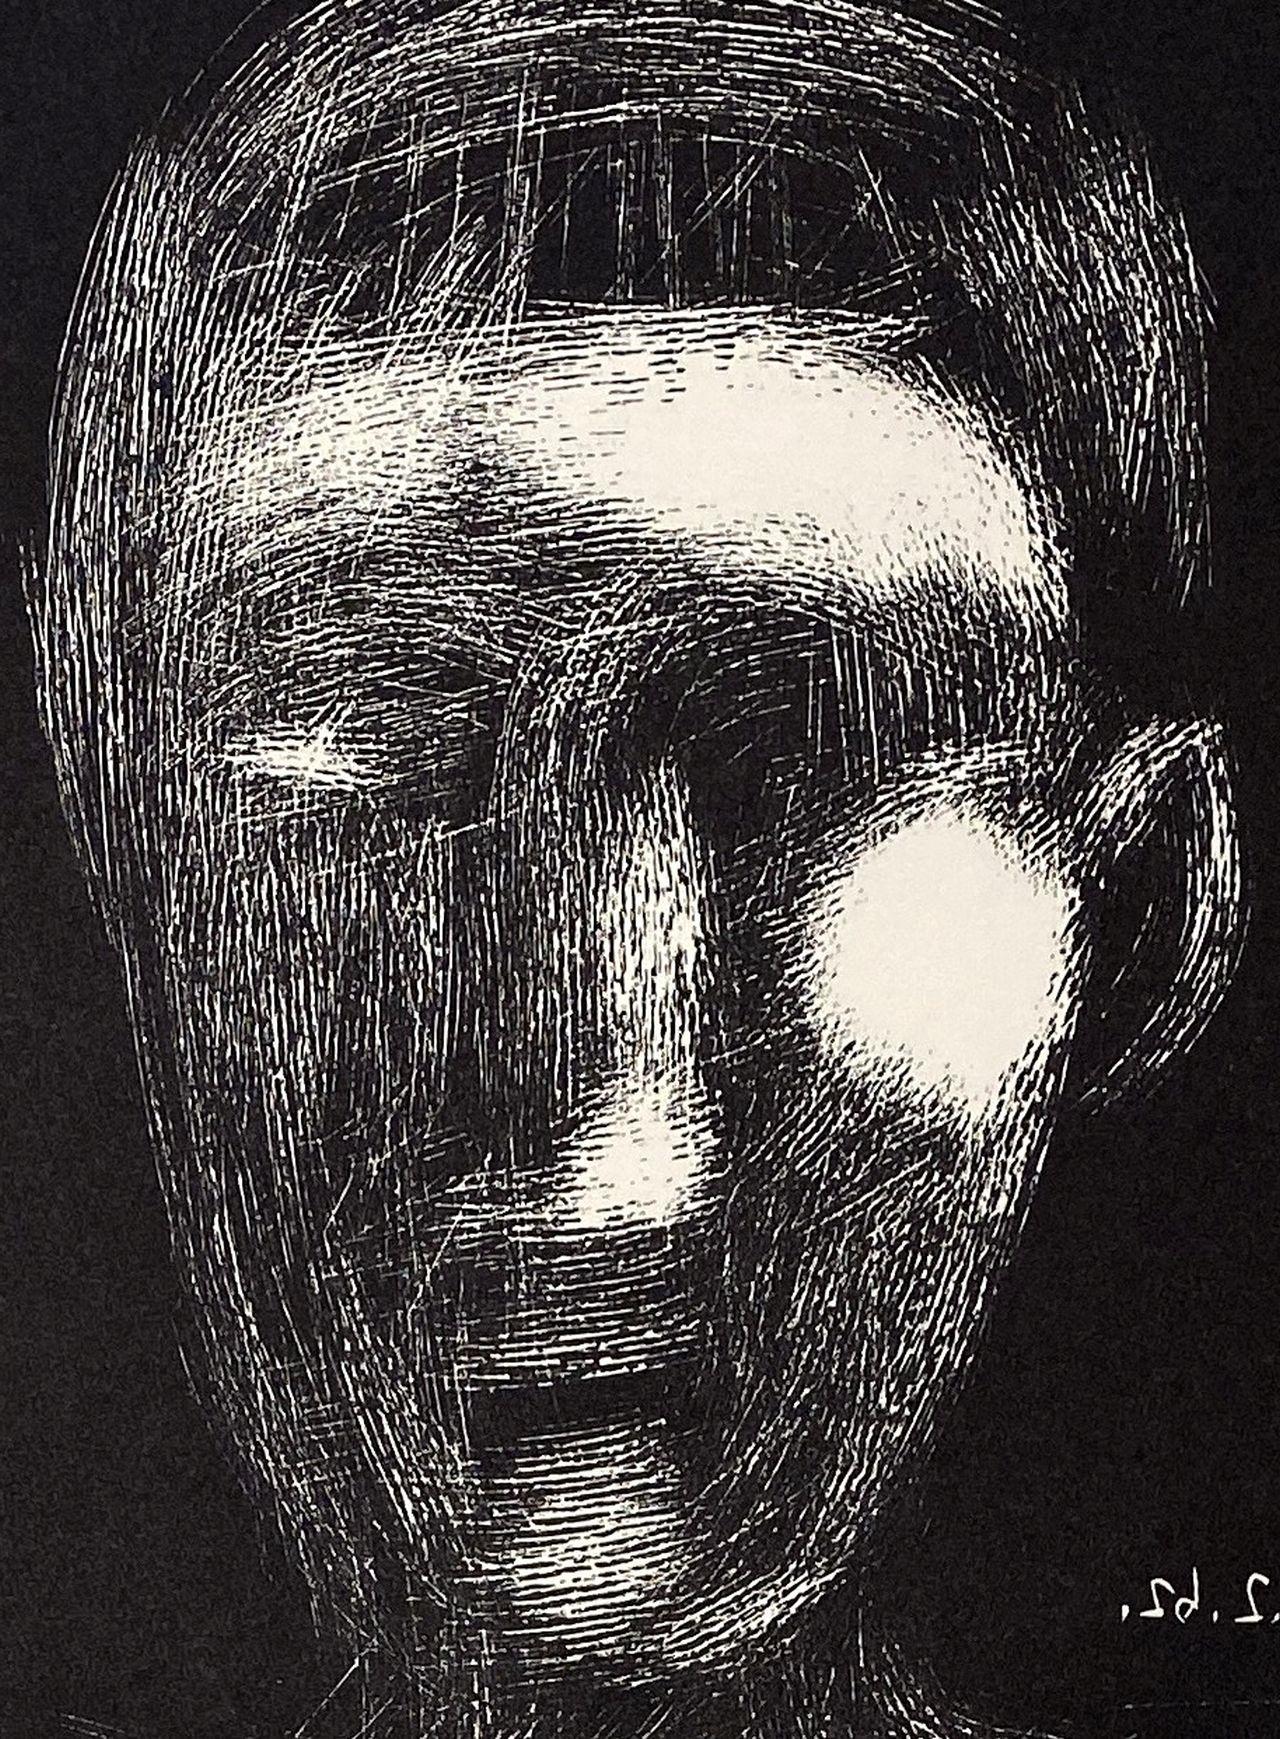 Boy's Head - Original Etching Handsigned - 50 copies - Modern Print by Pablo Picasso